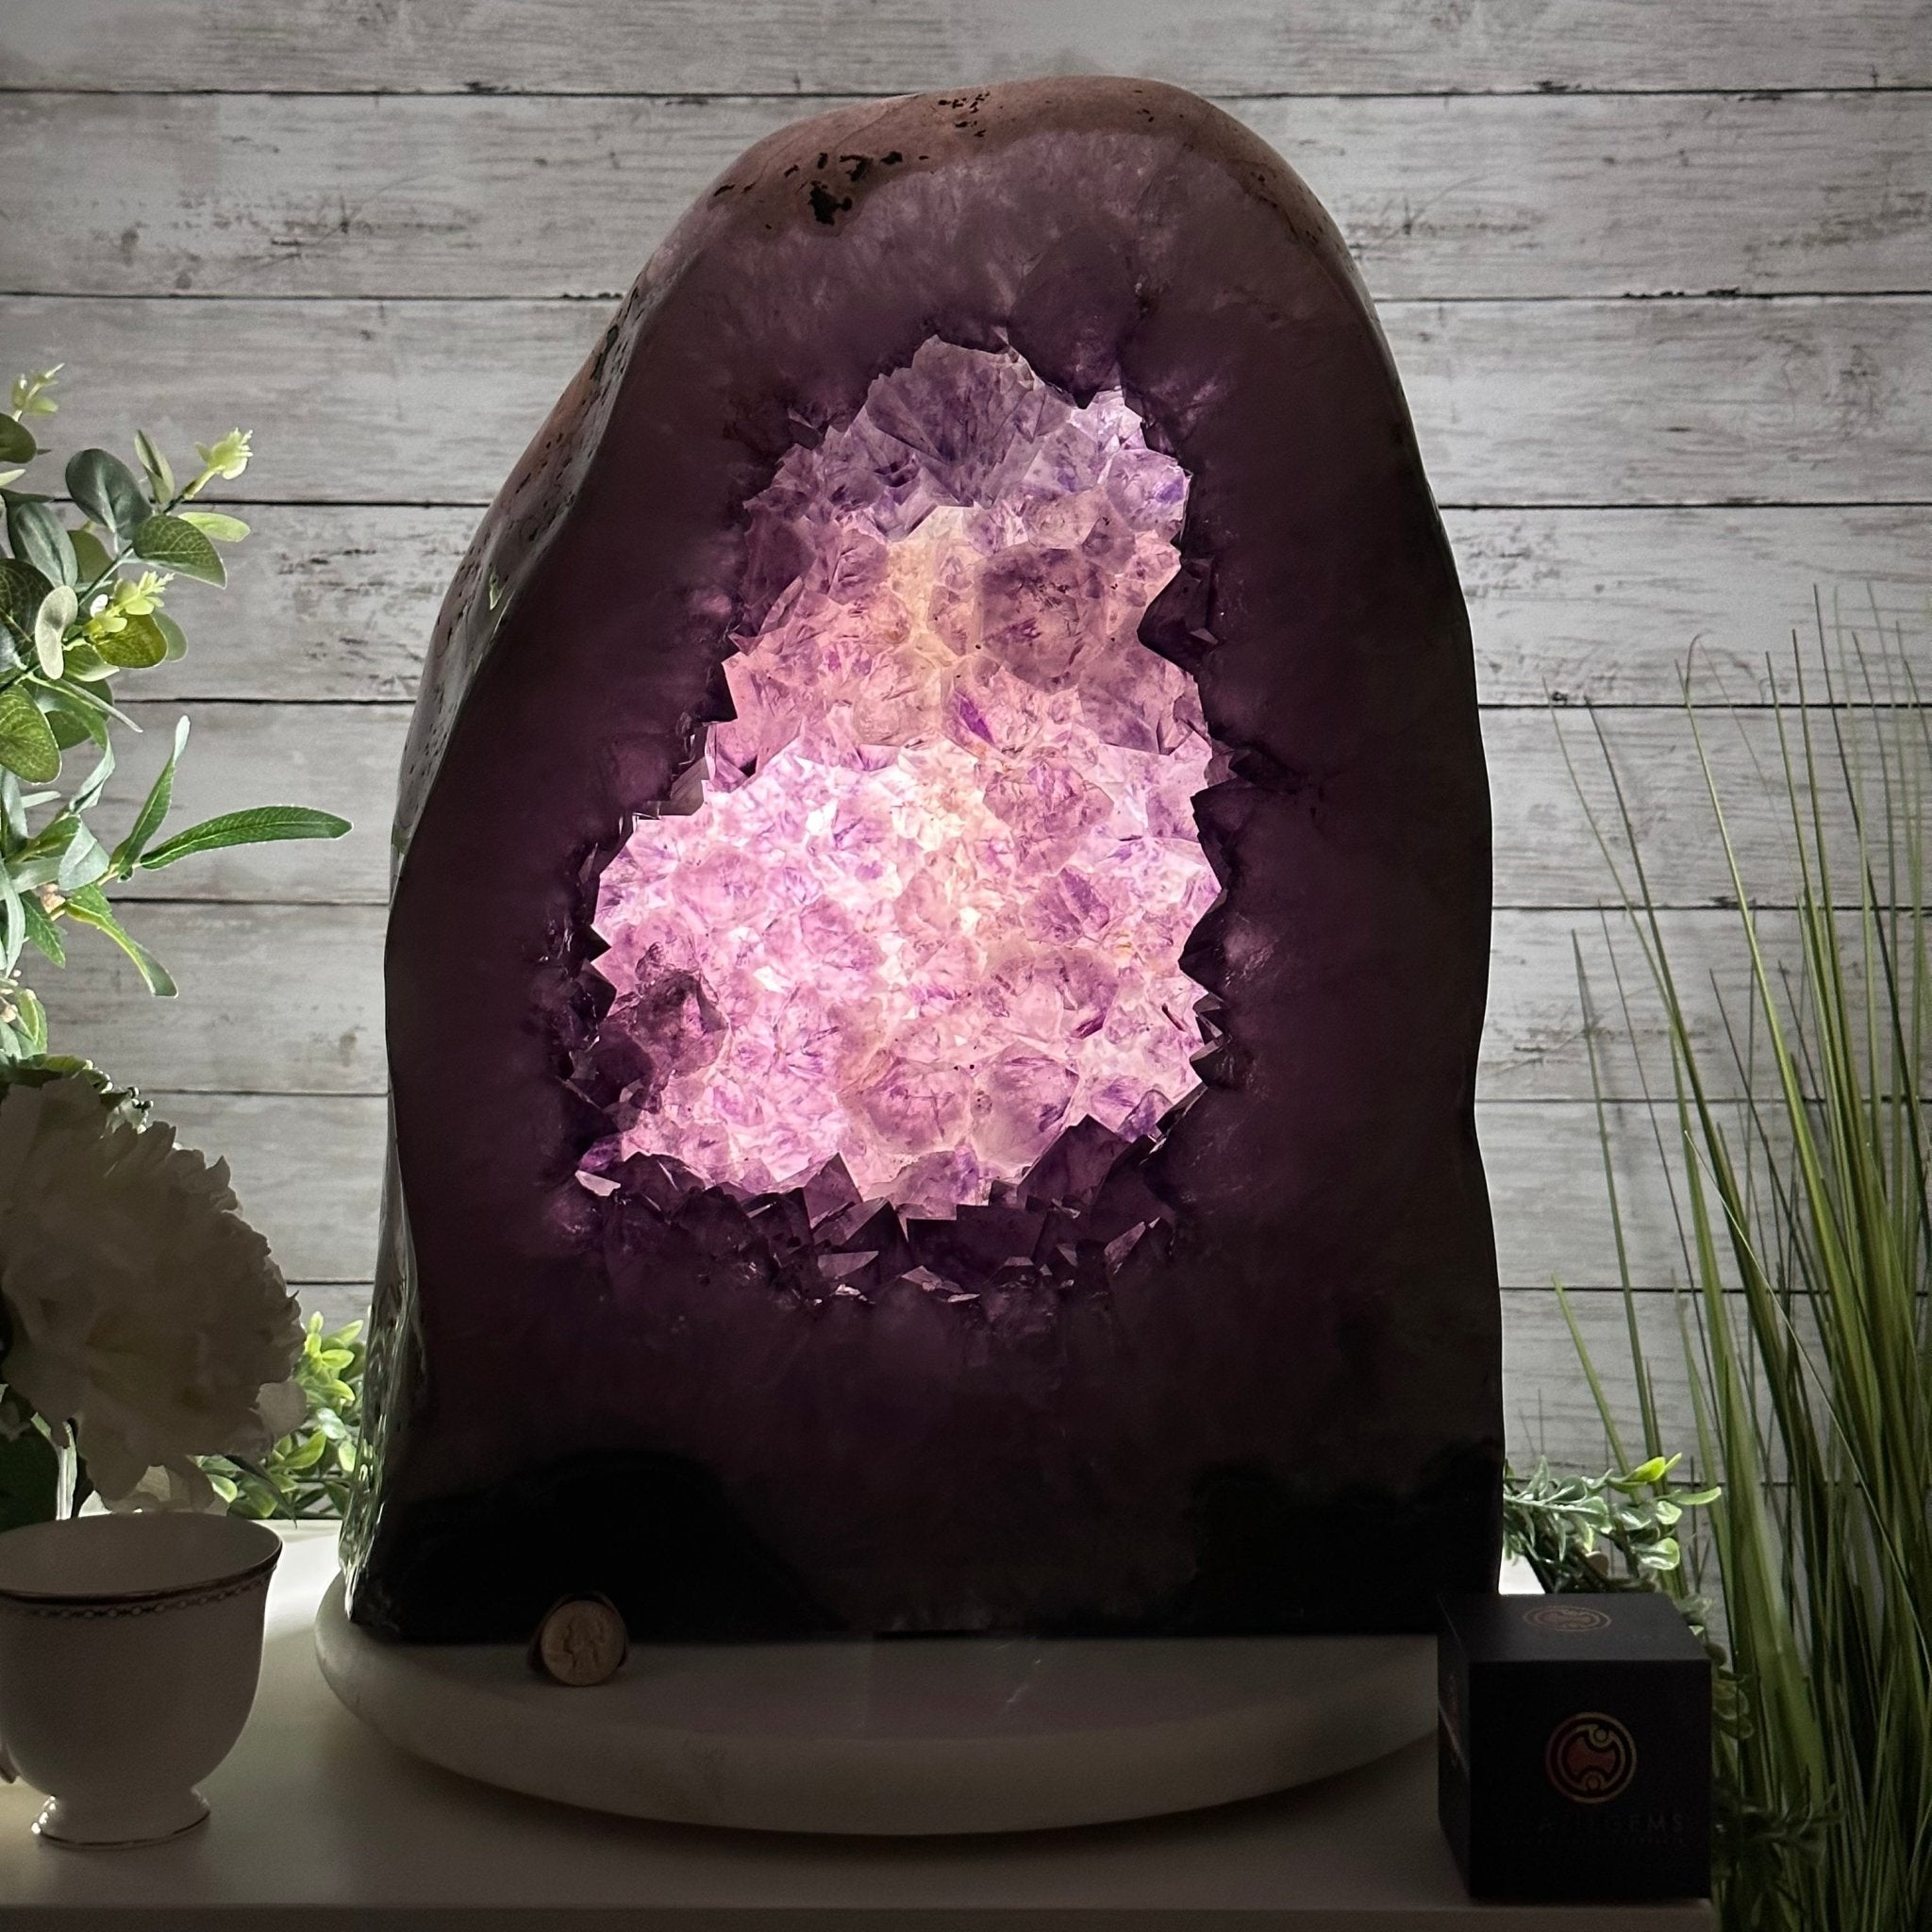 Extra Quality Polished Brazilian Amethyst Cathedral, 102.1 lbs & 18.3" tall Model #5602-0045 by Brazil Gems - Brazil GemsBrazil GemsExtra Quality Polished Brazilian Amethyst Cathedral, 102.1 lbs & 18.3" tall Model #5602-0045 by Brazil GemsPolished Cathedrals5602-0045